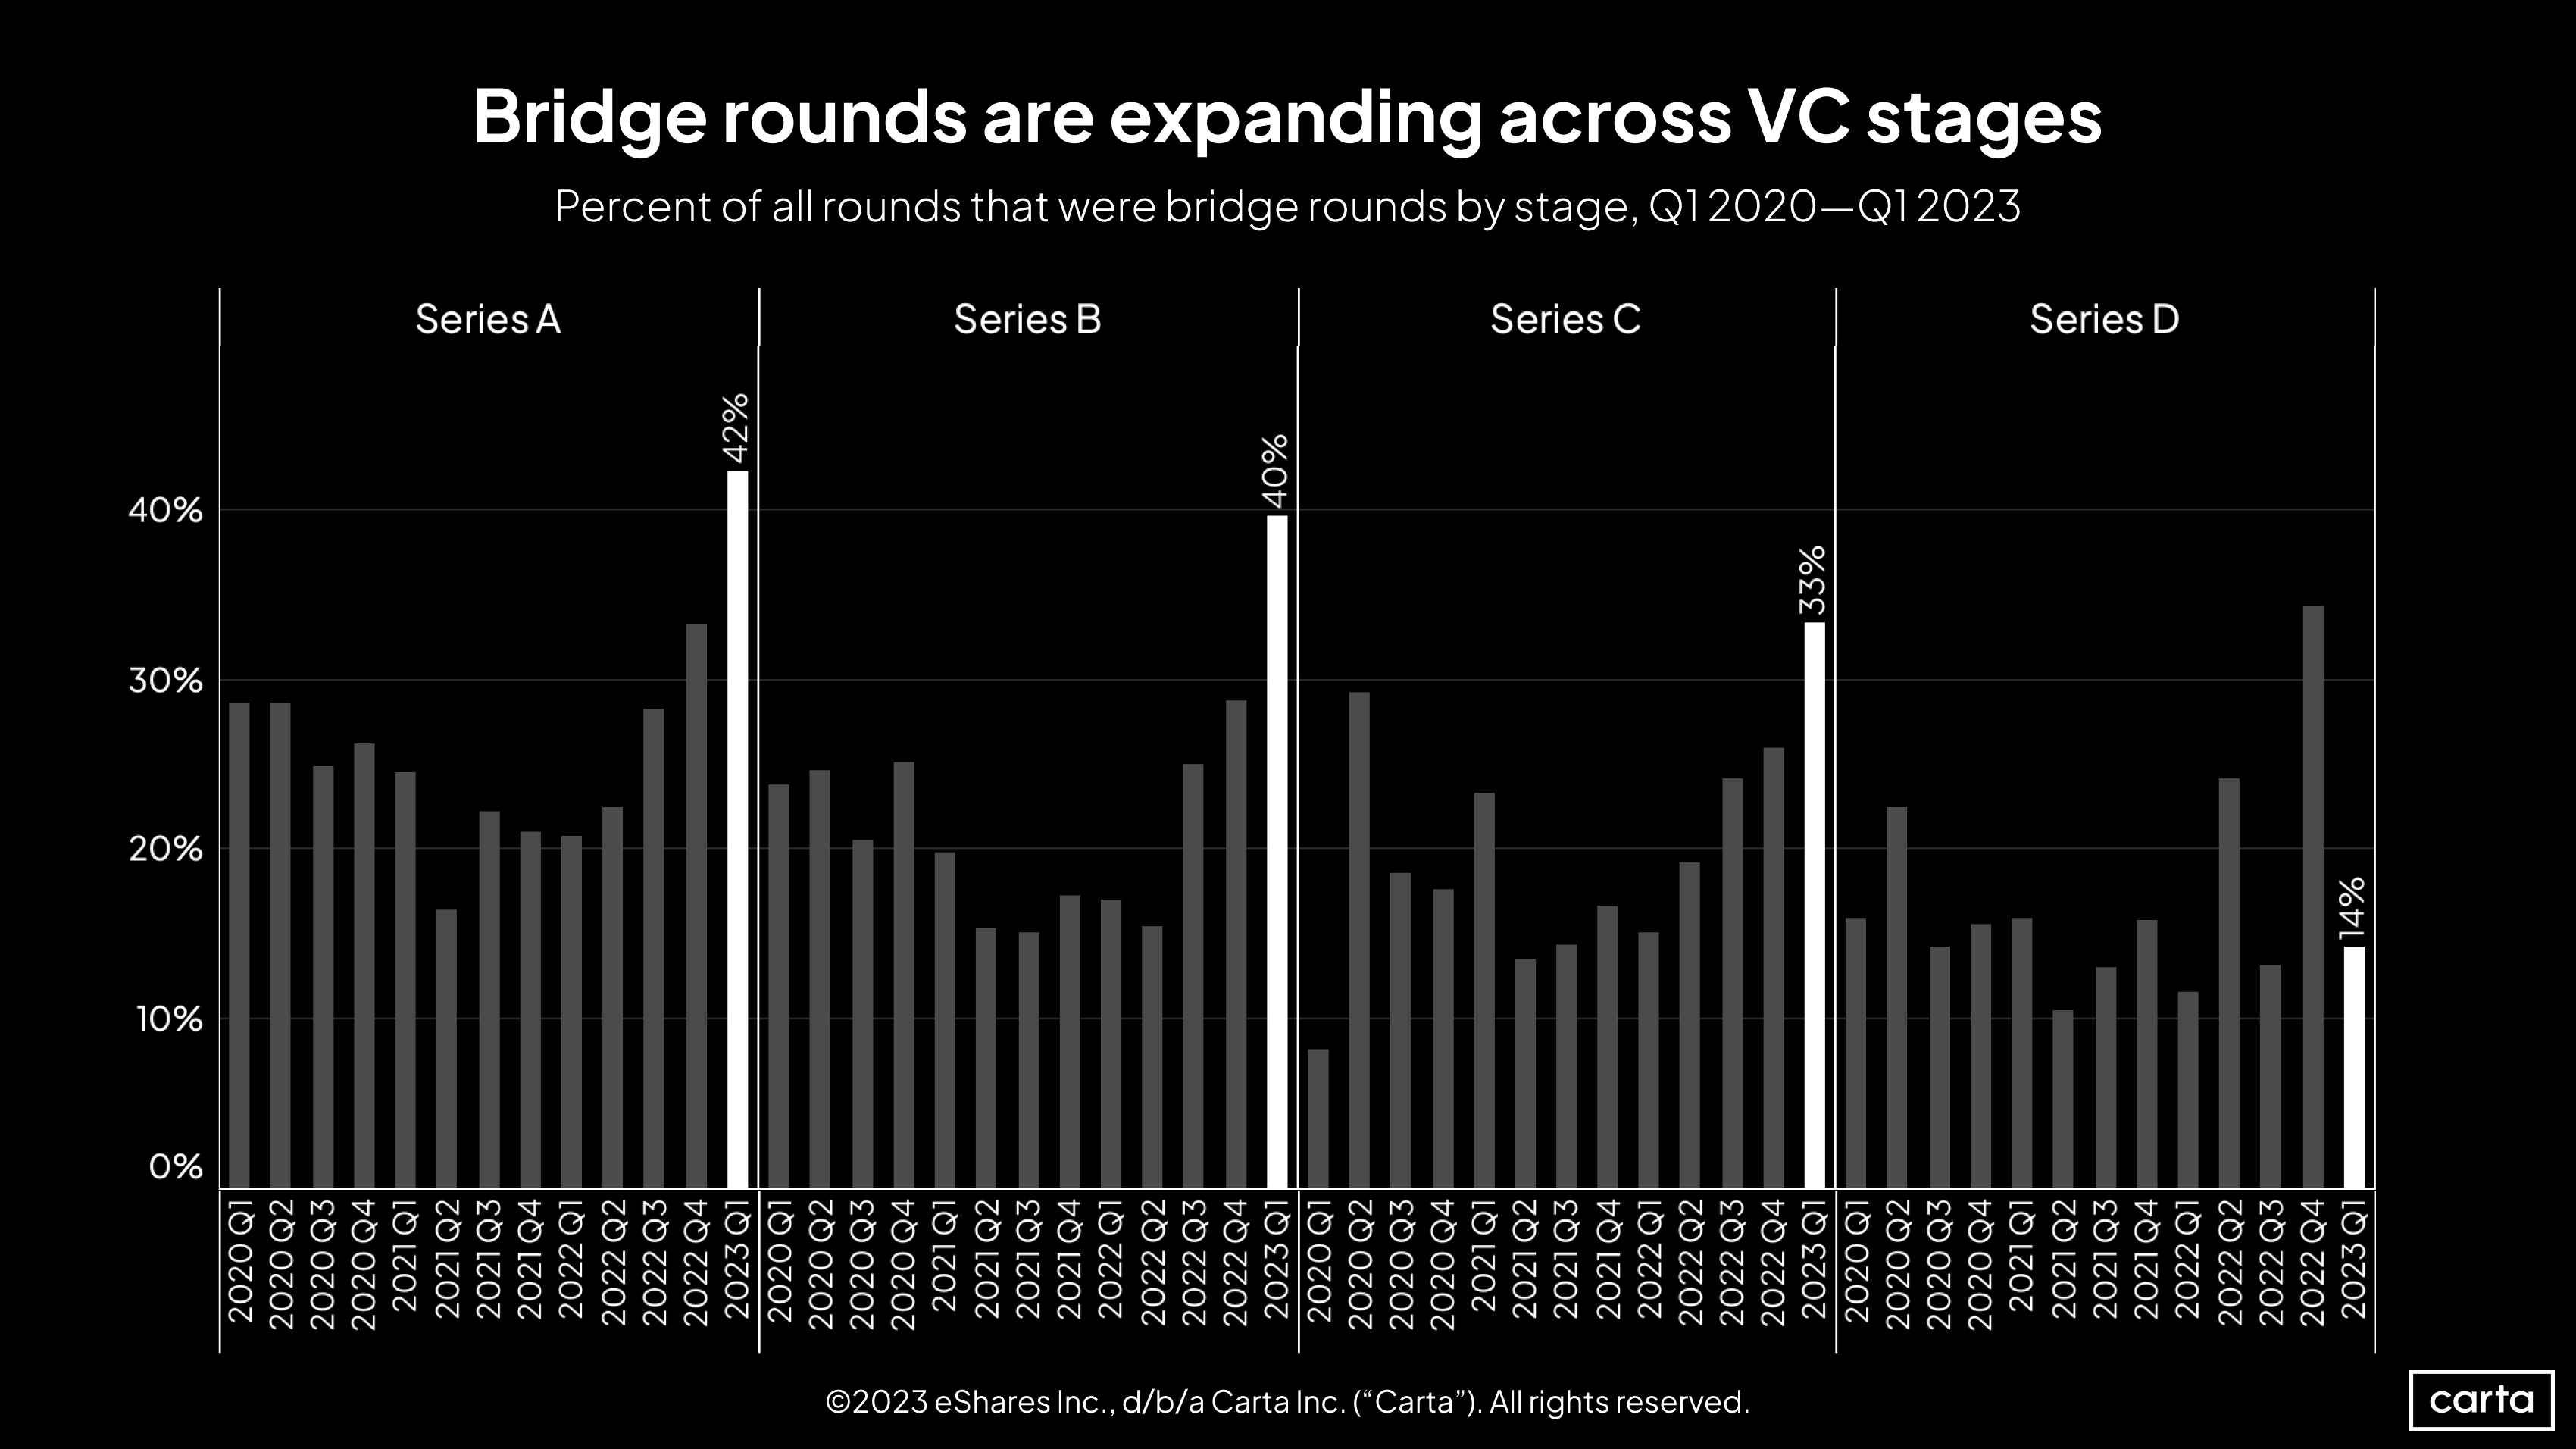 Percent of all rounds that were bridge rounds by stage, Q1 2020-Q1 2023